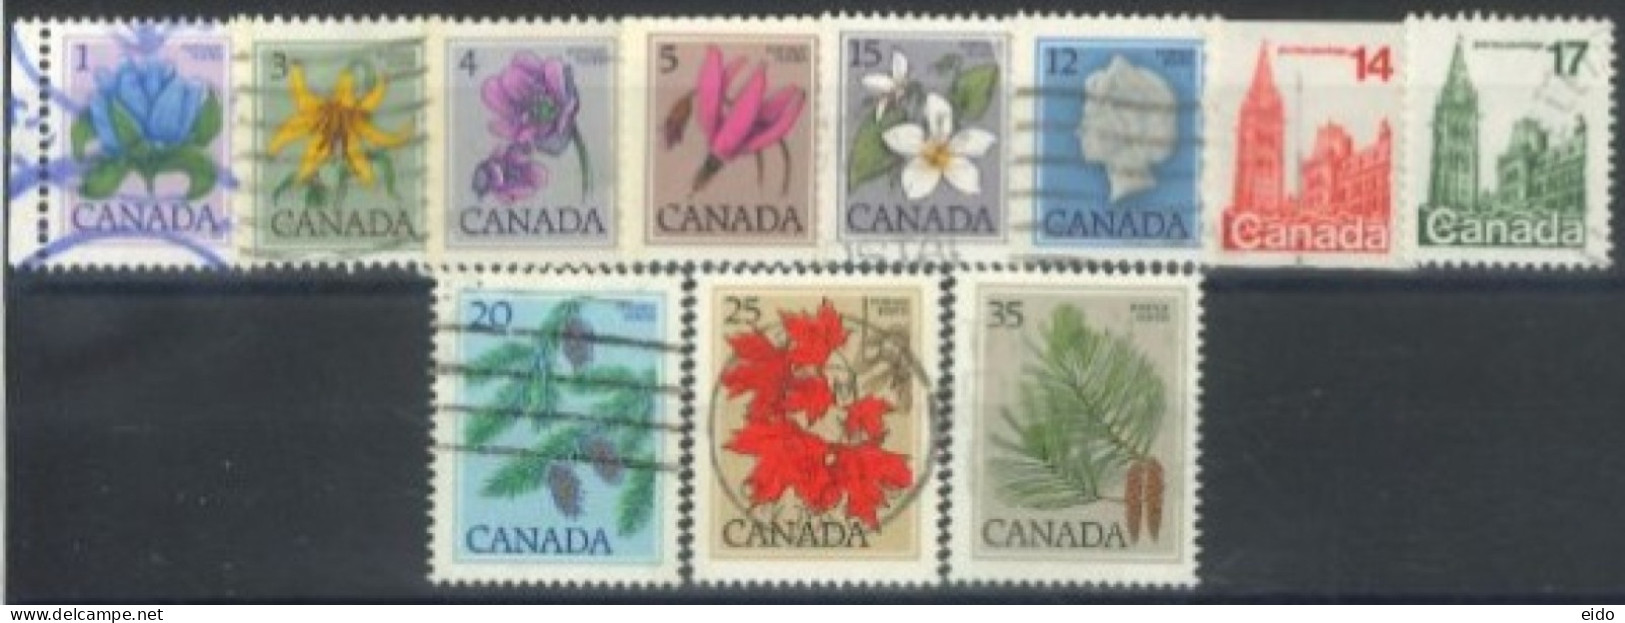 CANADA - 1977, QUEEN ELIZABETH II, HOUSE OF PARLIAMENT, FLOWERS & LEAVES STAMPS SET OF 11, USED. - Usati